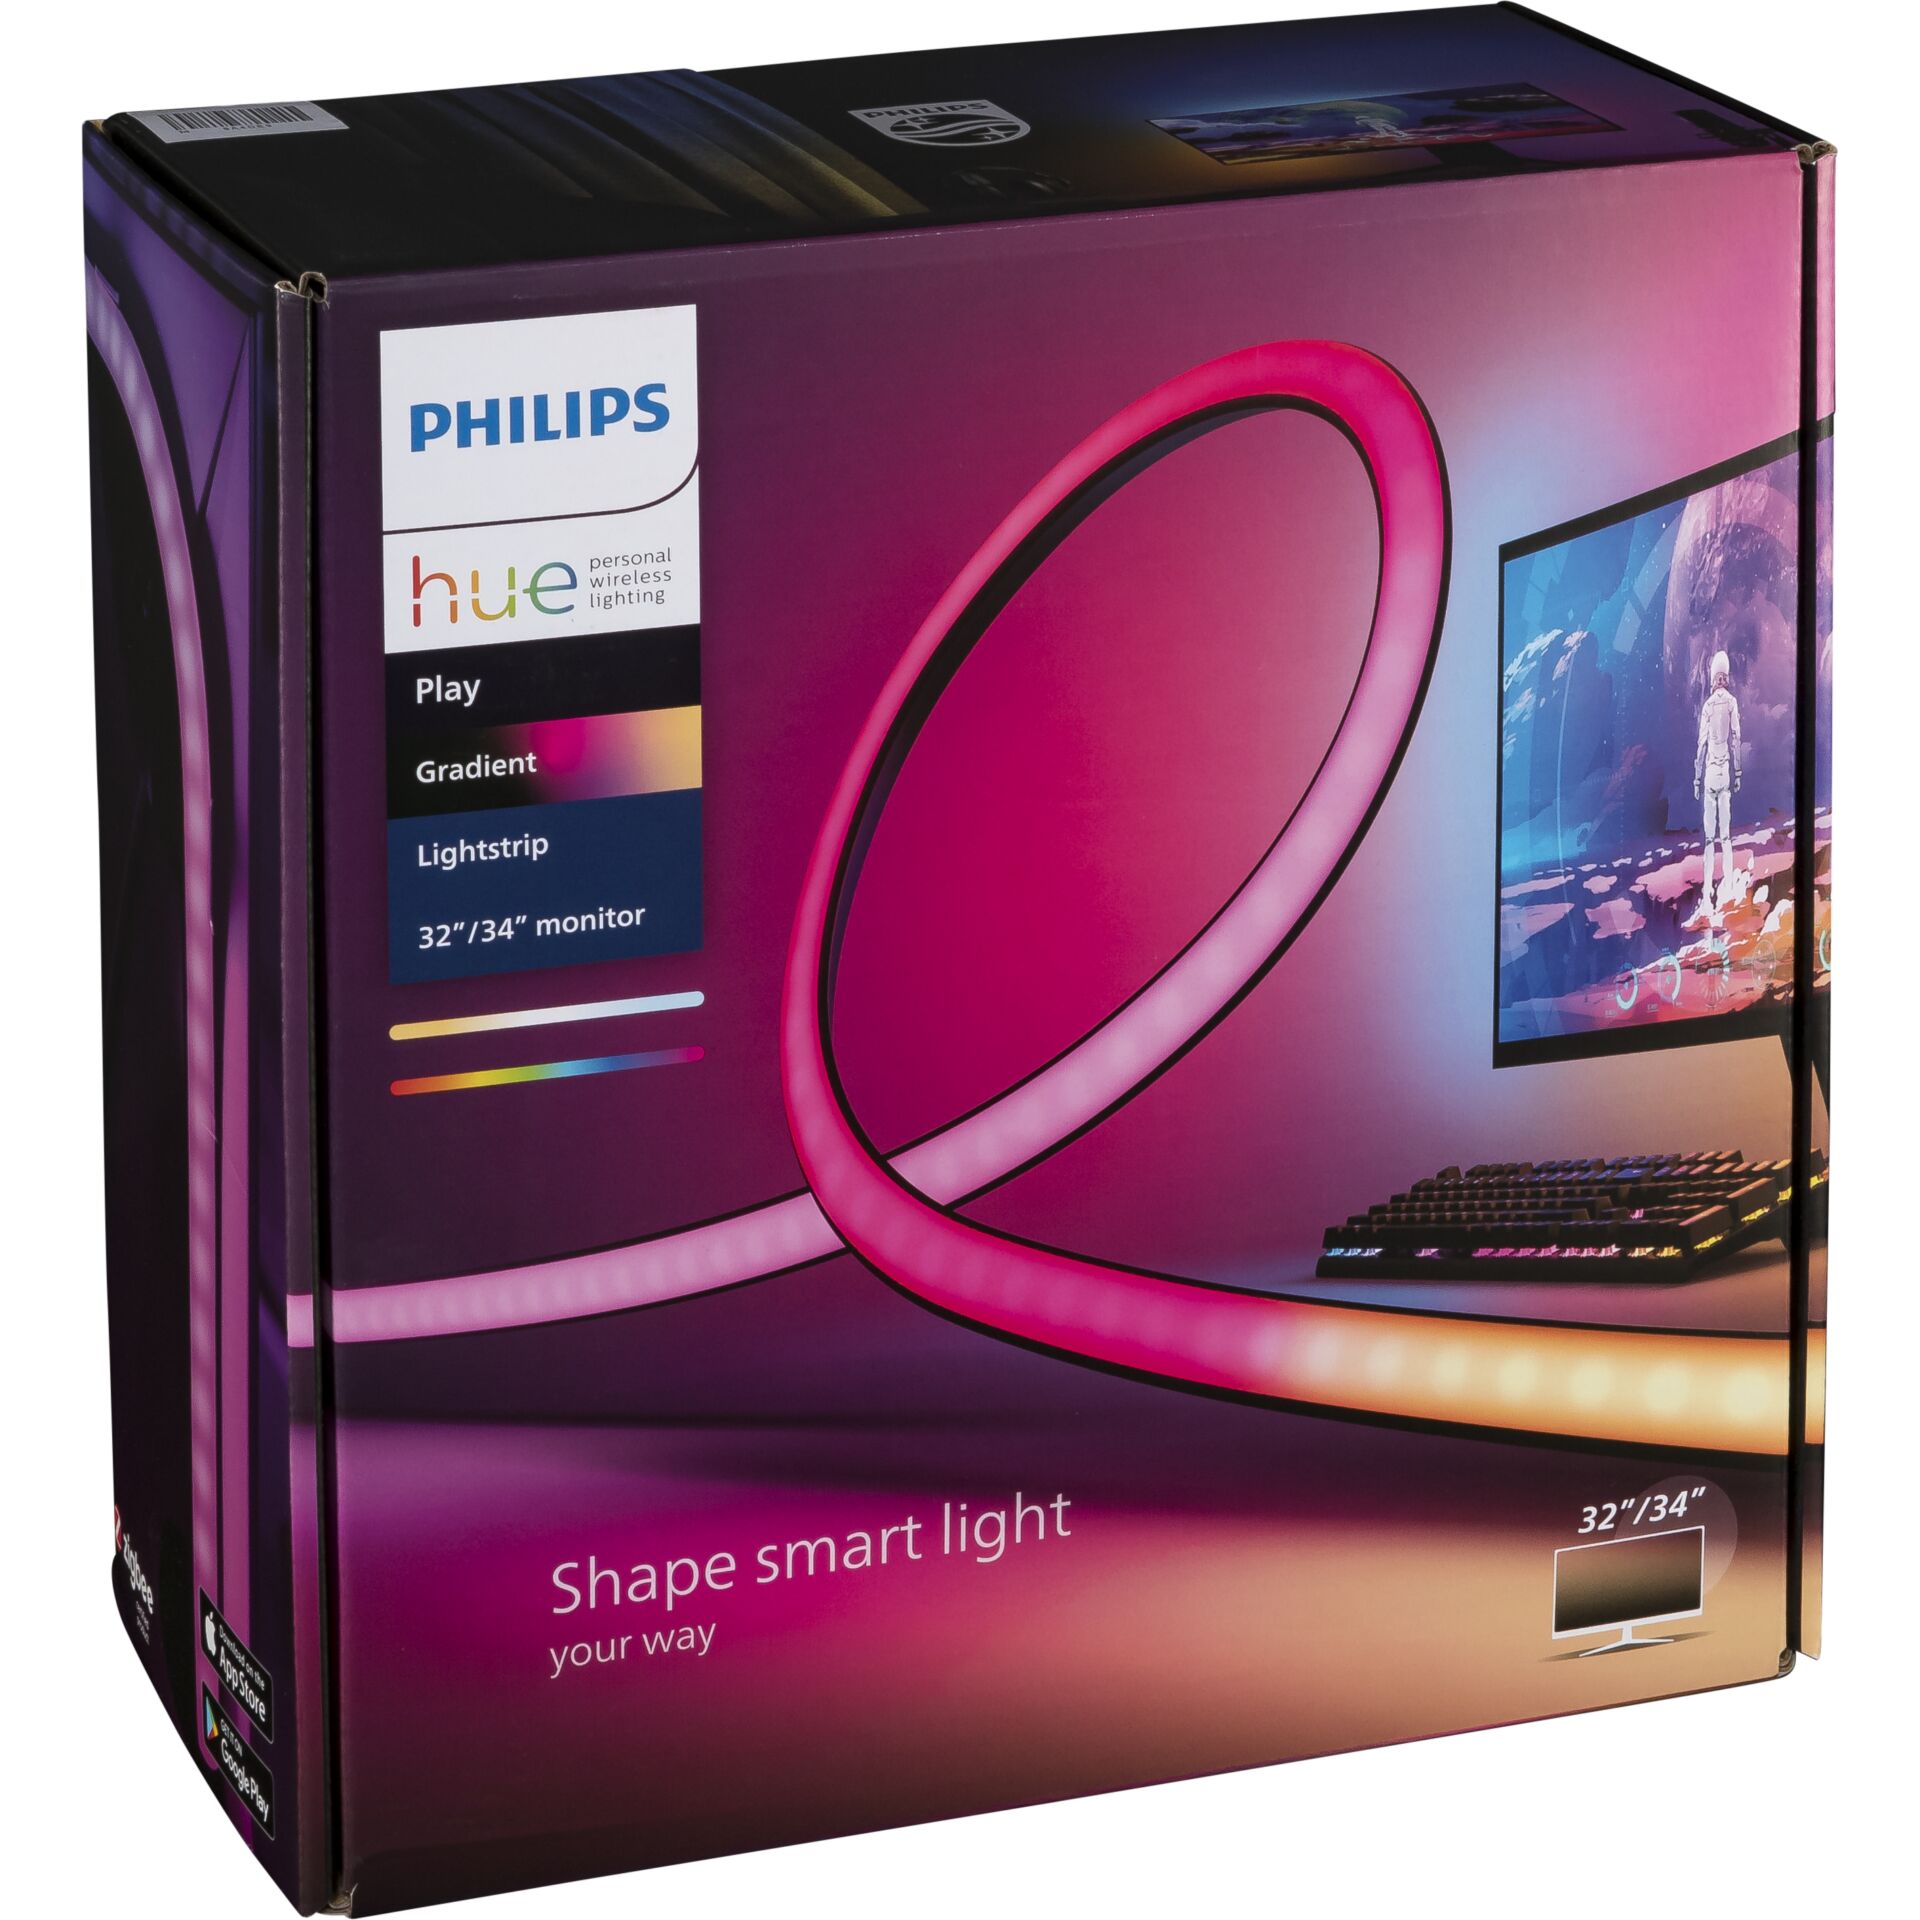 Philips Hue Play Gradient LED Lightstrip PC 32/34 Inch